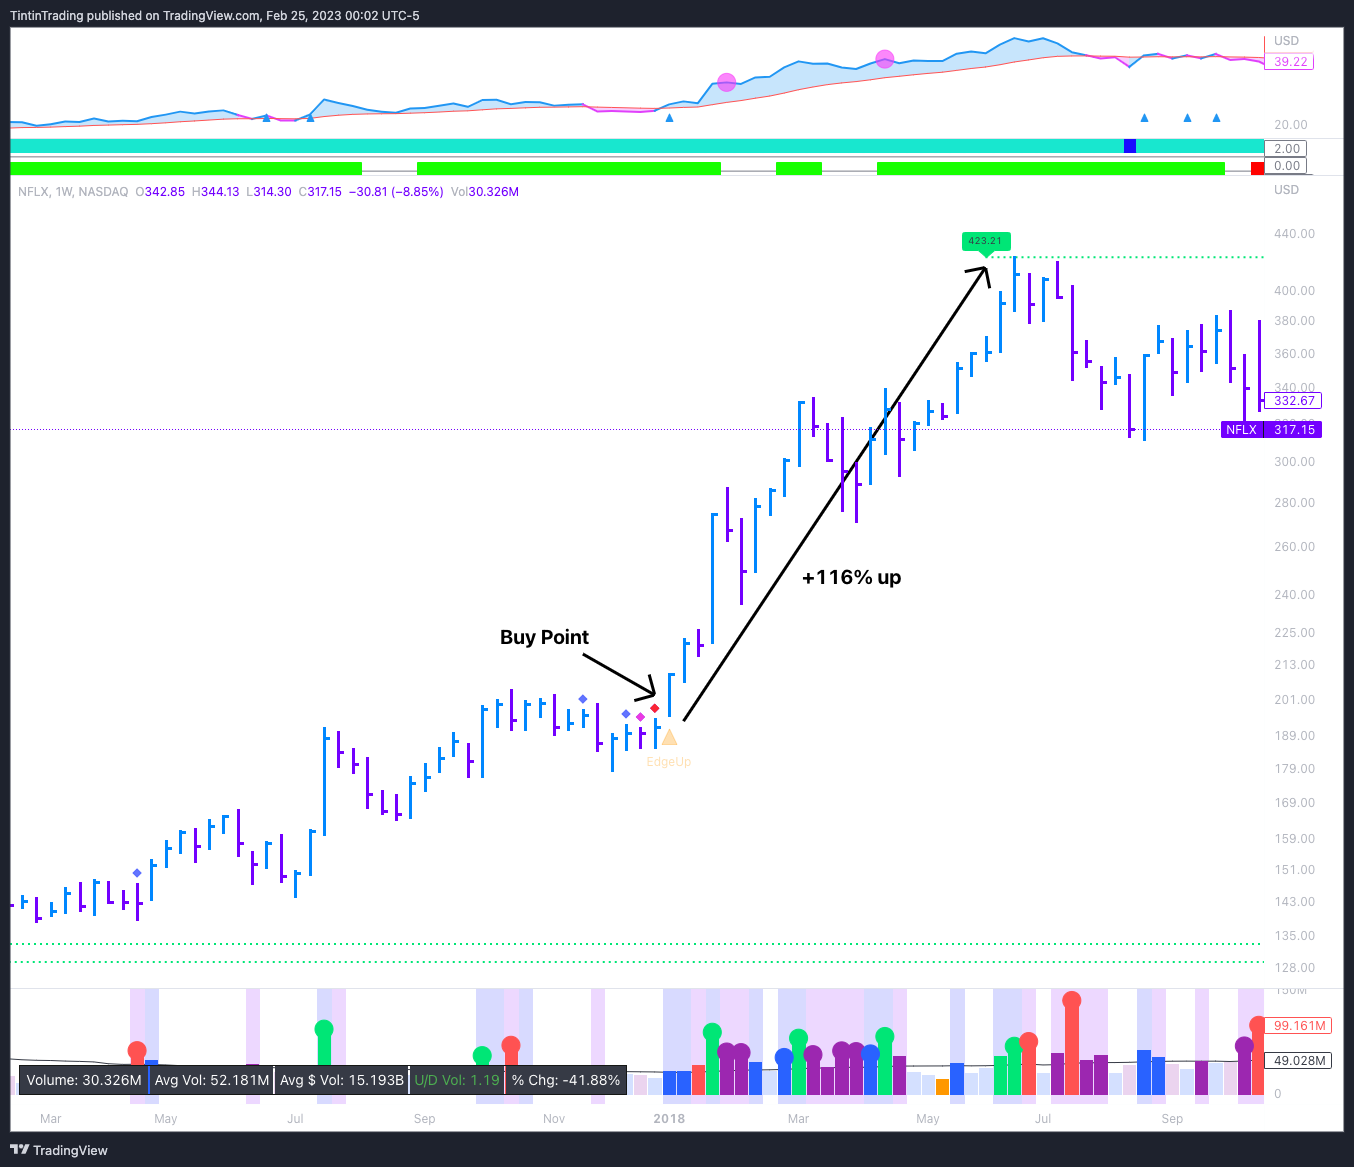 Weekly Chart on NFLX showing 3 tight closes pattern before +116% run-up